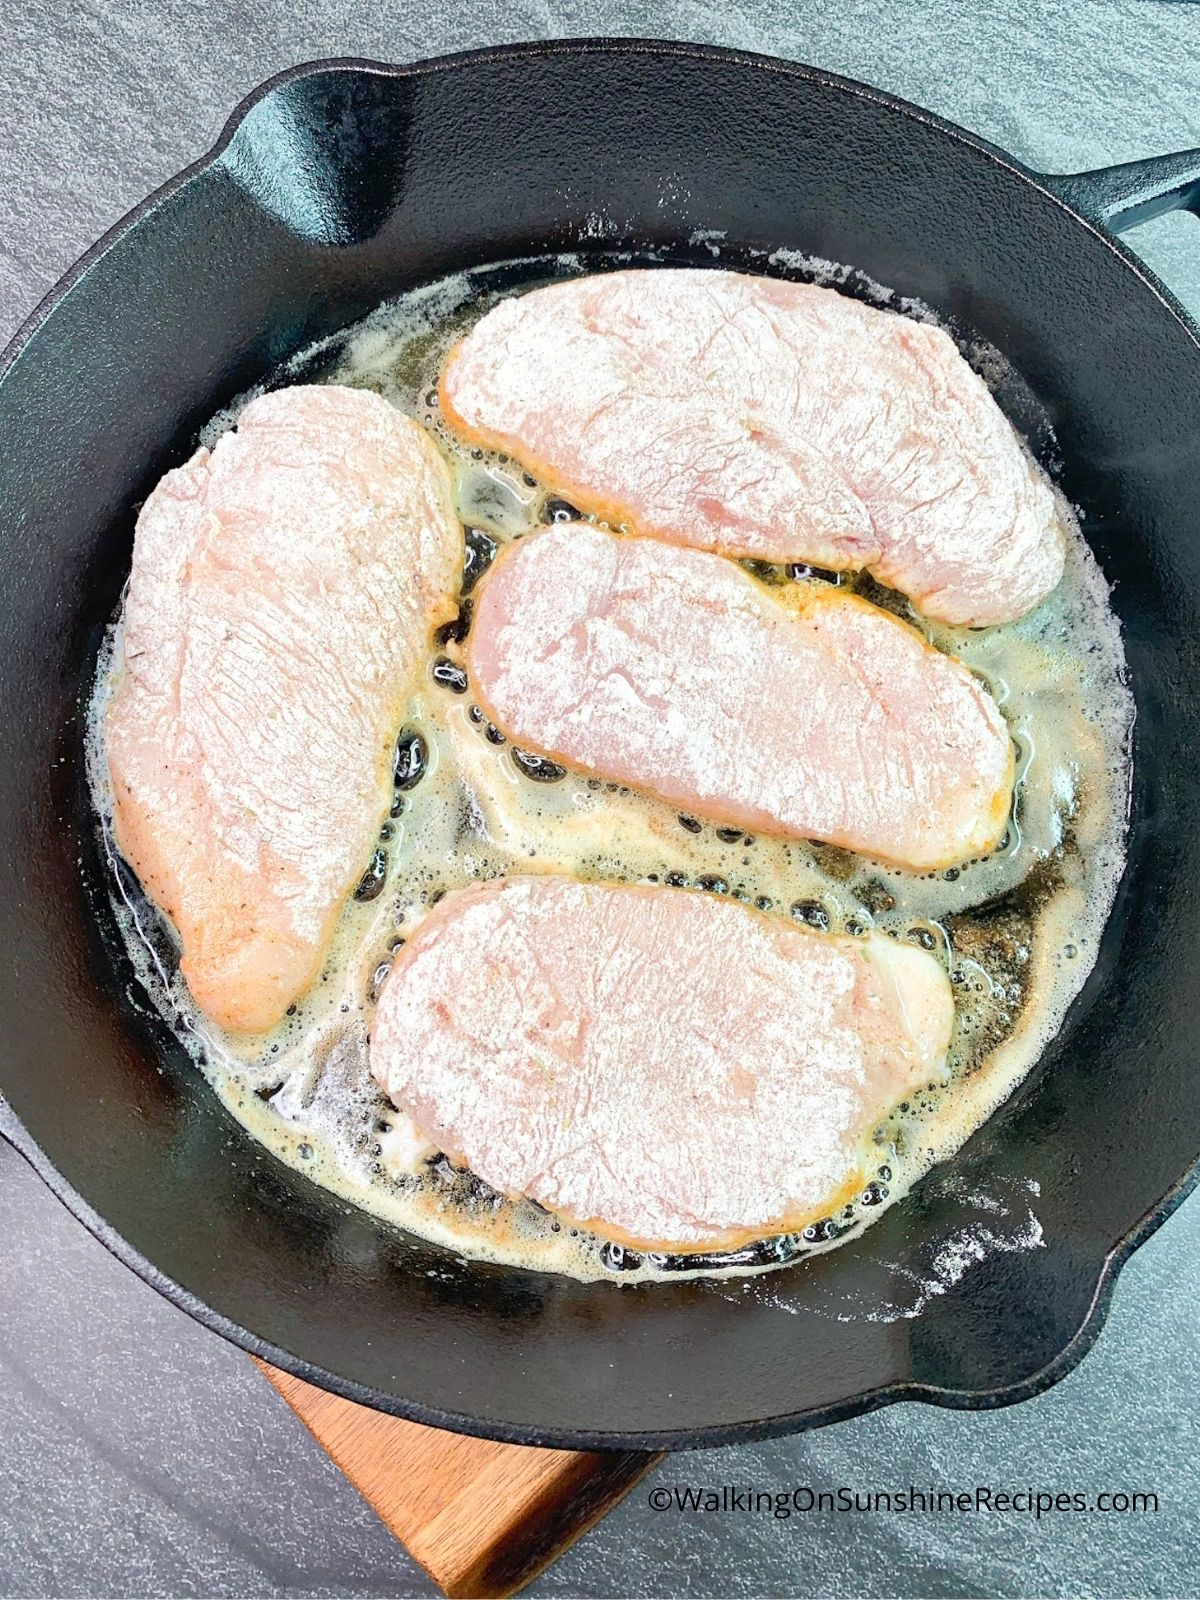 Chicken cutlets cooking in cast iron skillet pan.